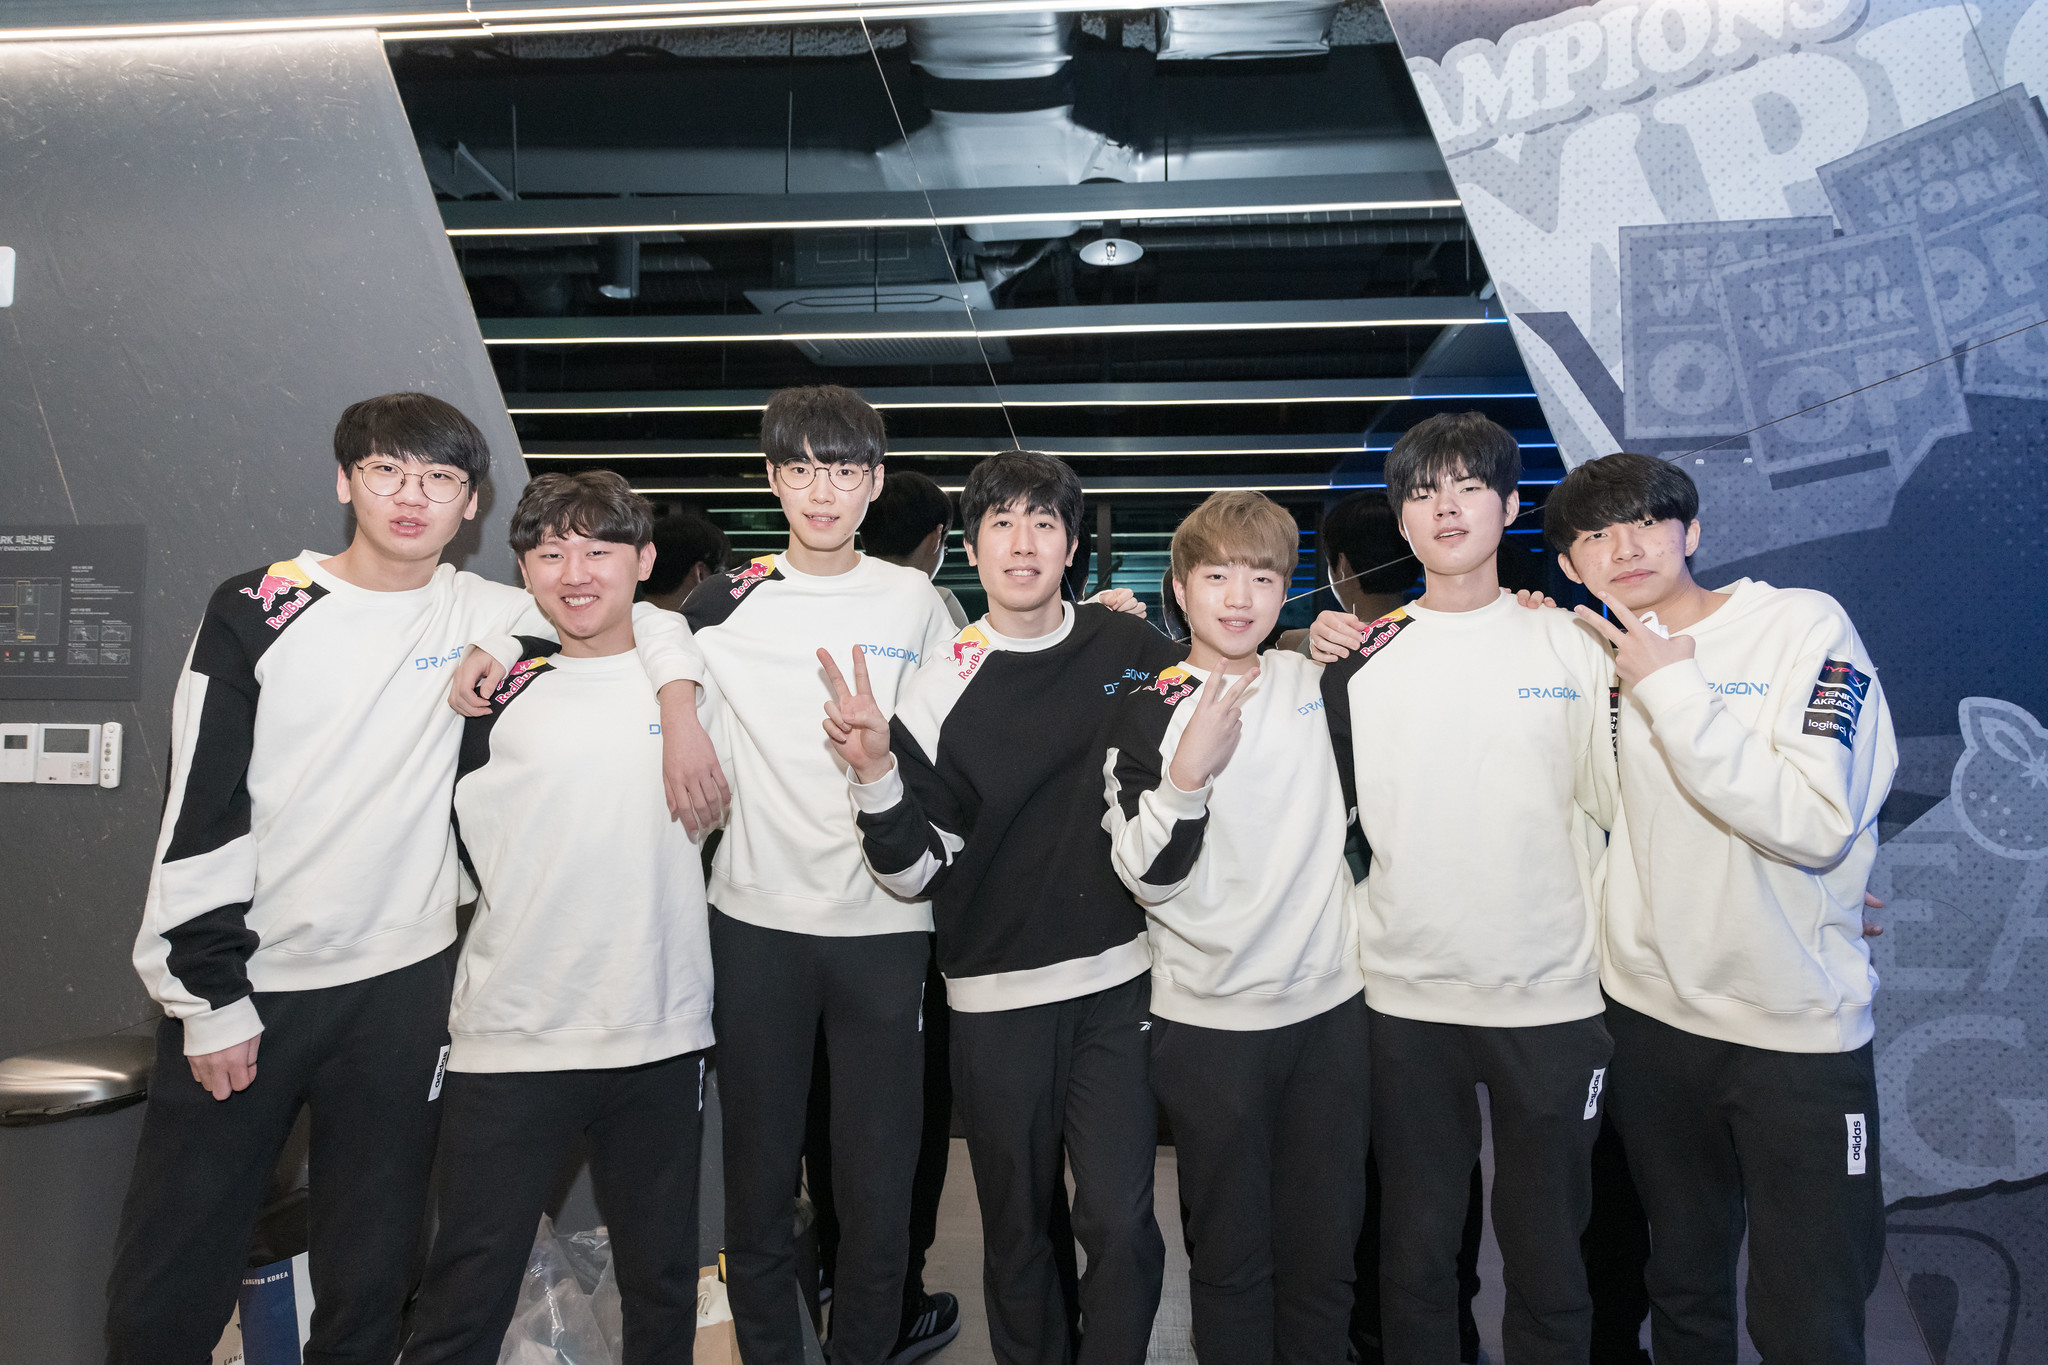 DragonX Picked Up A Hard-Fought Series Win Against Sandbox Gaming In Korea’s Summer Split 2020